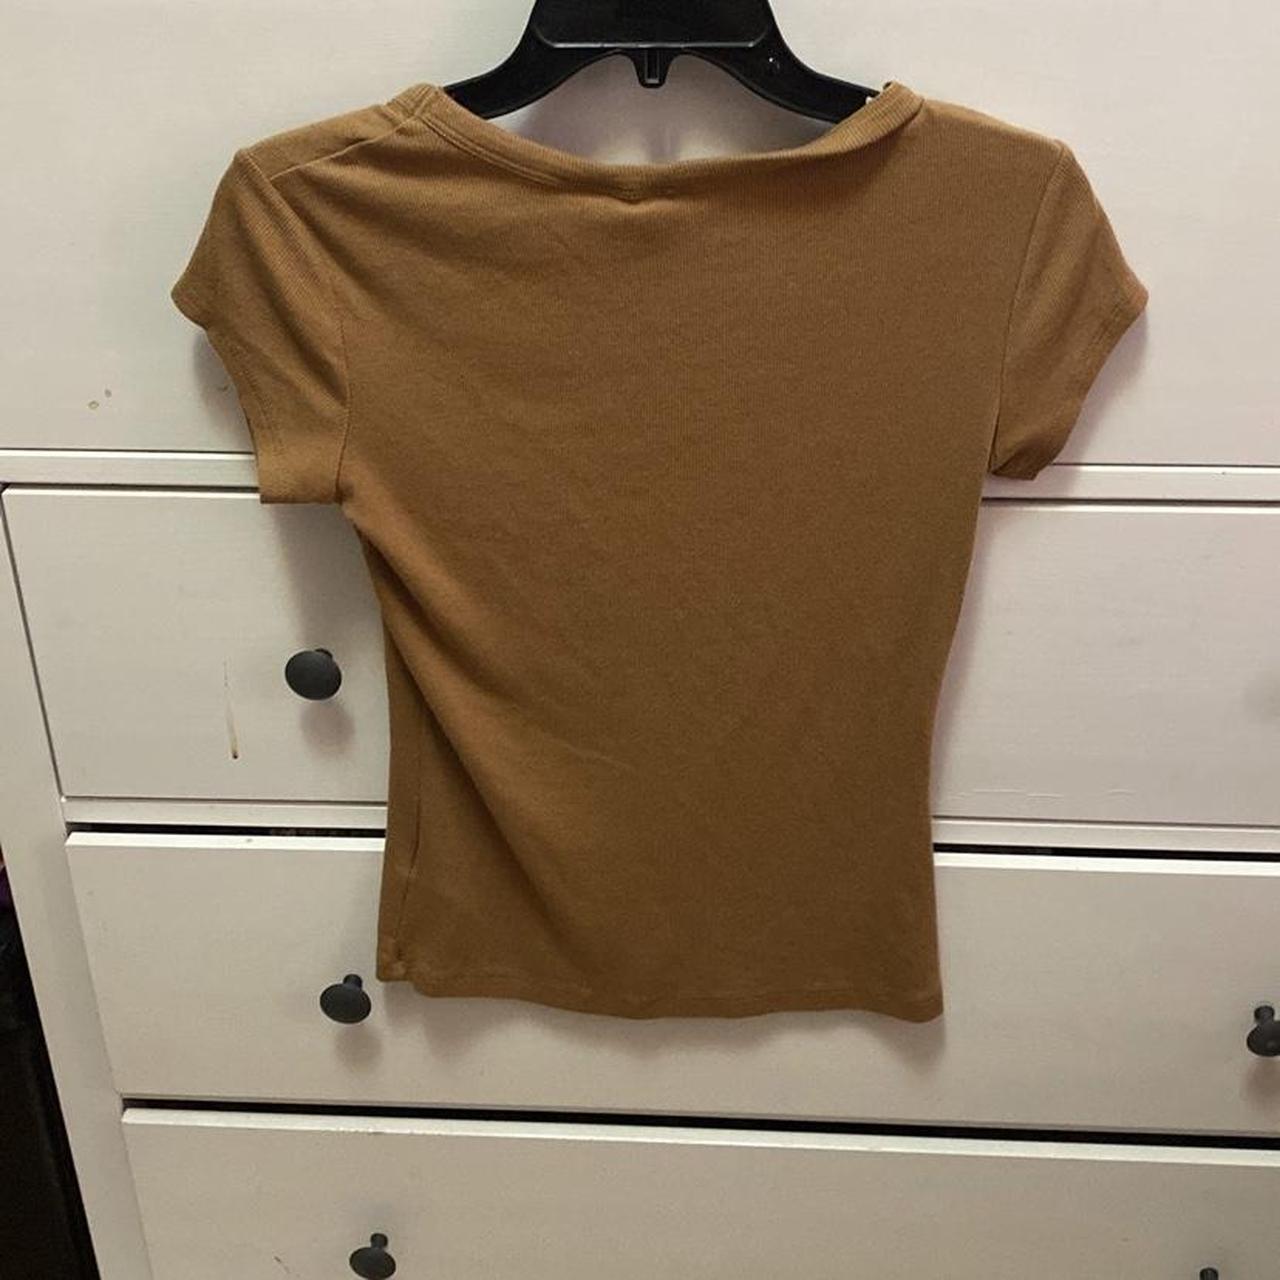 Joie Women's Brown and Tan Shirt (4)